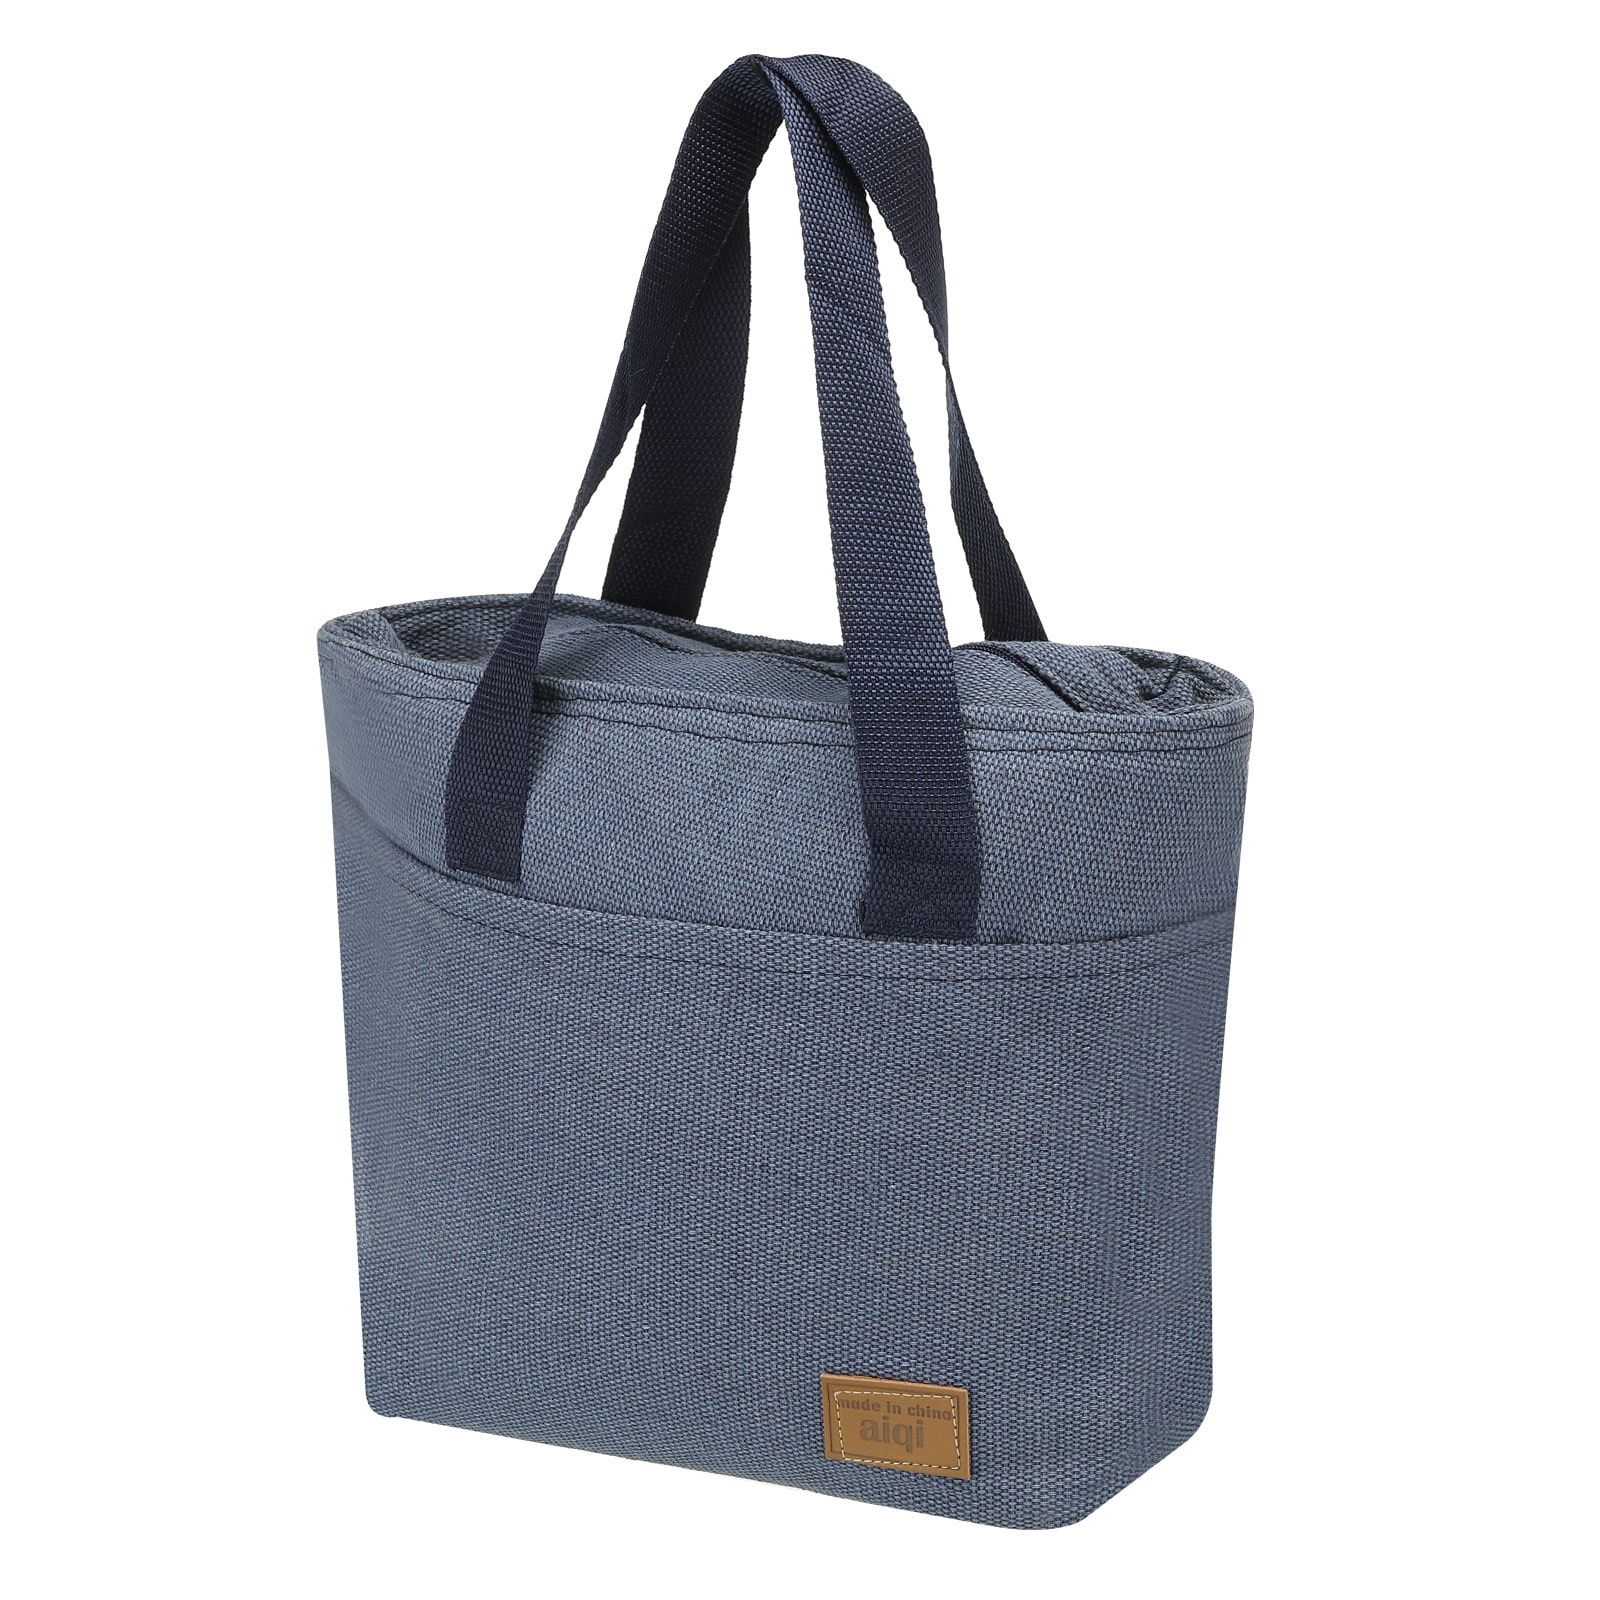 Insulated Lunch Bag, Cotton Linen Lunch Tote Bag, 9.84"x4.33"x12.6"